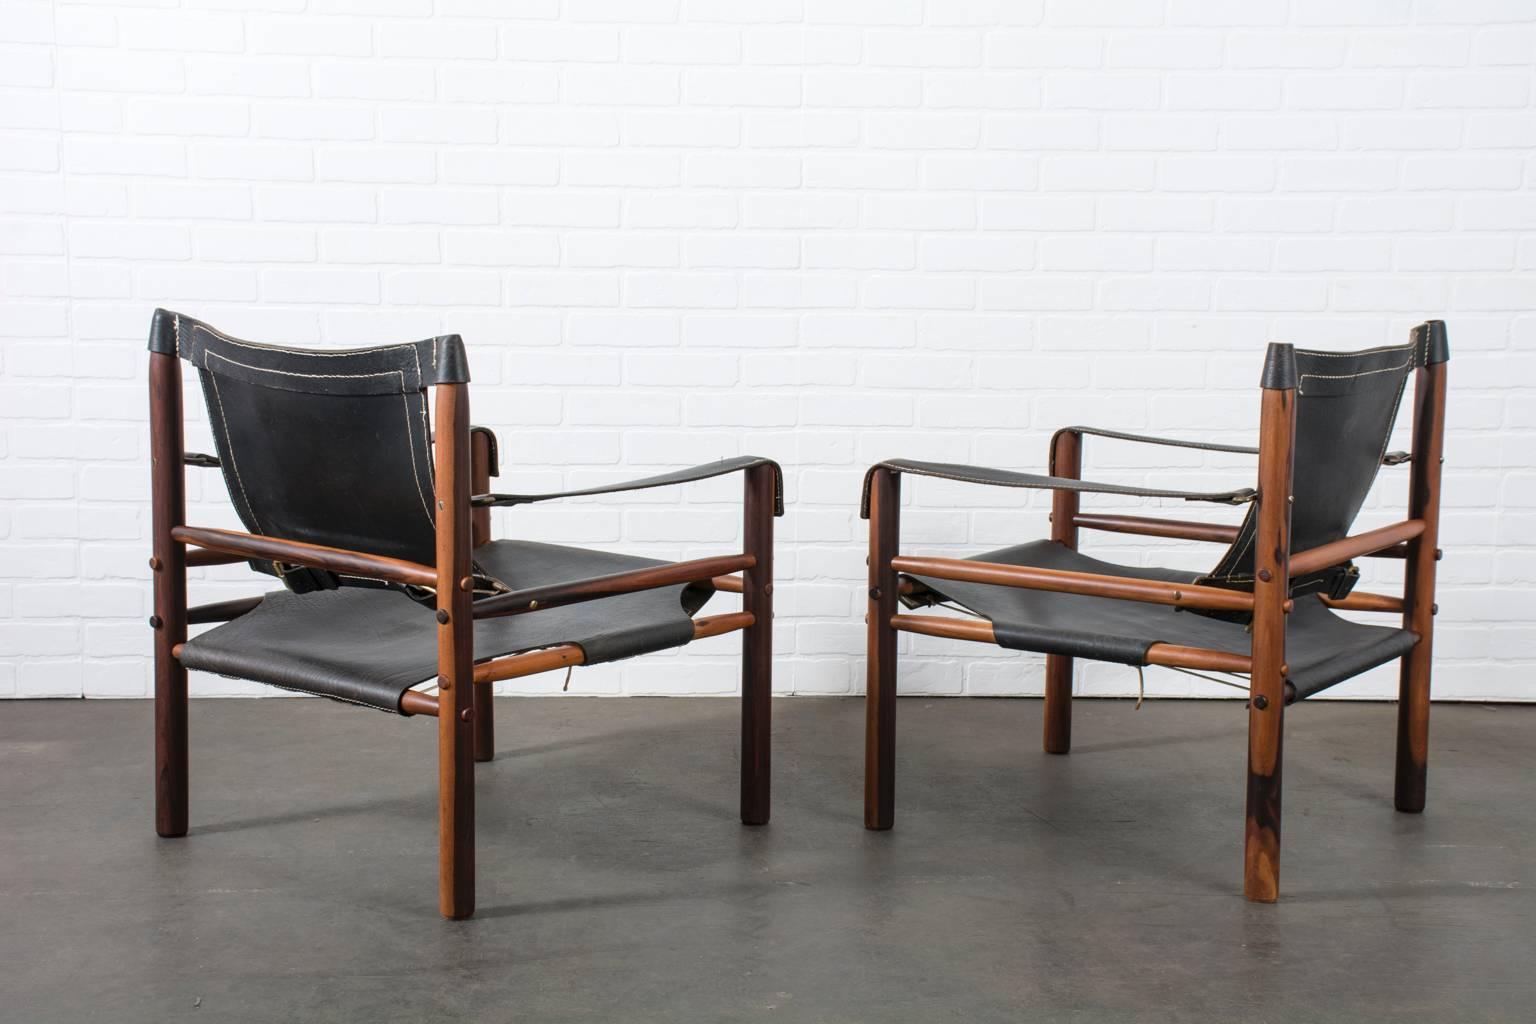 This is a pair of vintage Mid-Century safari chairs by Arne Norell. The have rosewood frames, black leather upholstery, and brass hardware.